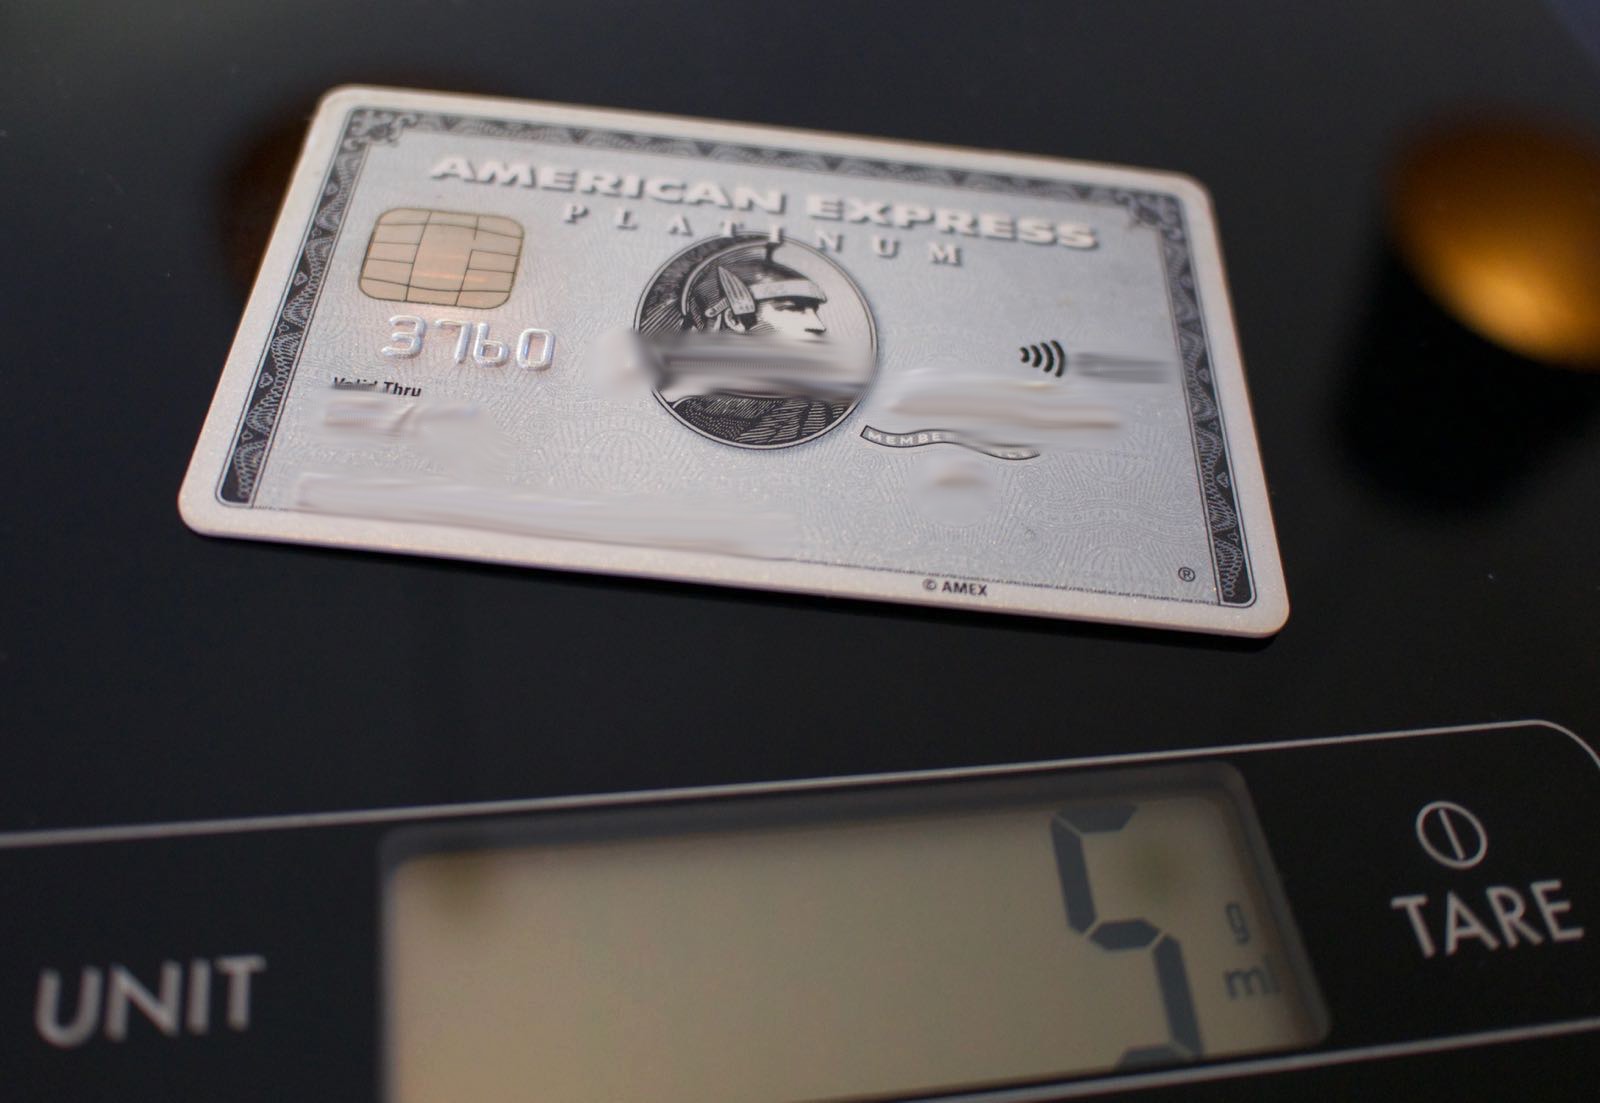 a-look-at-the-american-express-platinum-metal-card-point-hacks